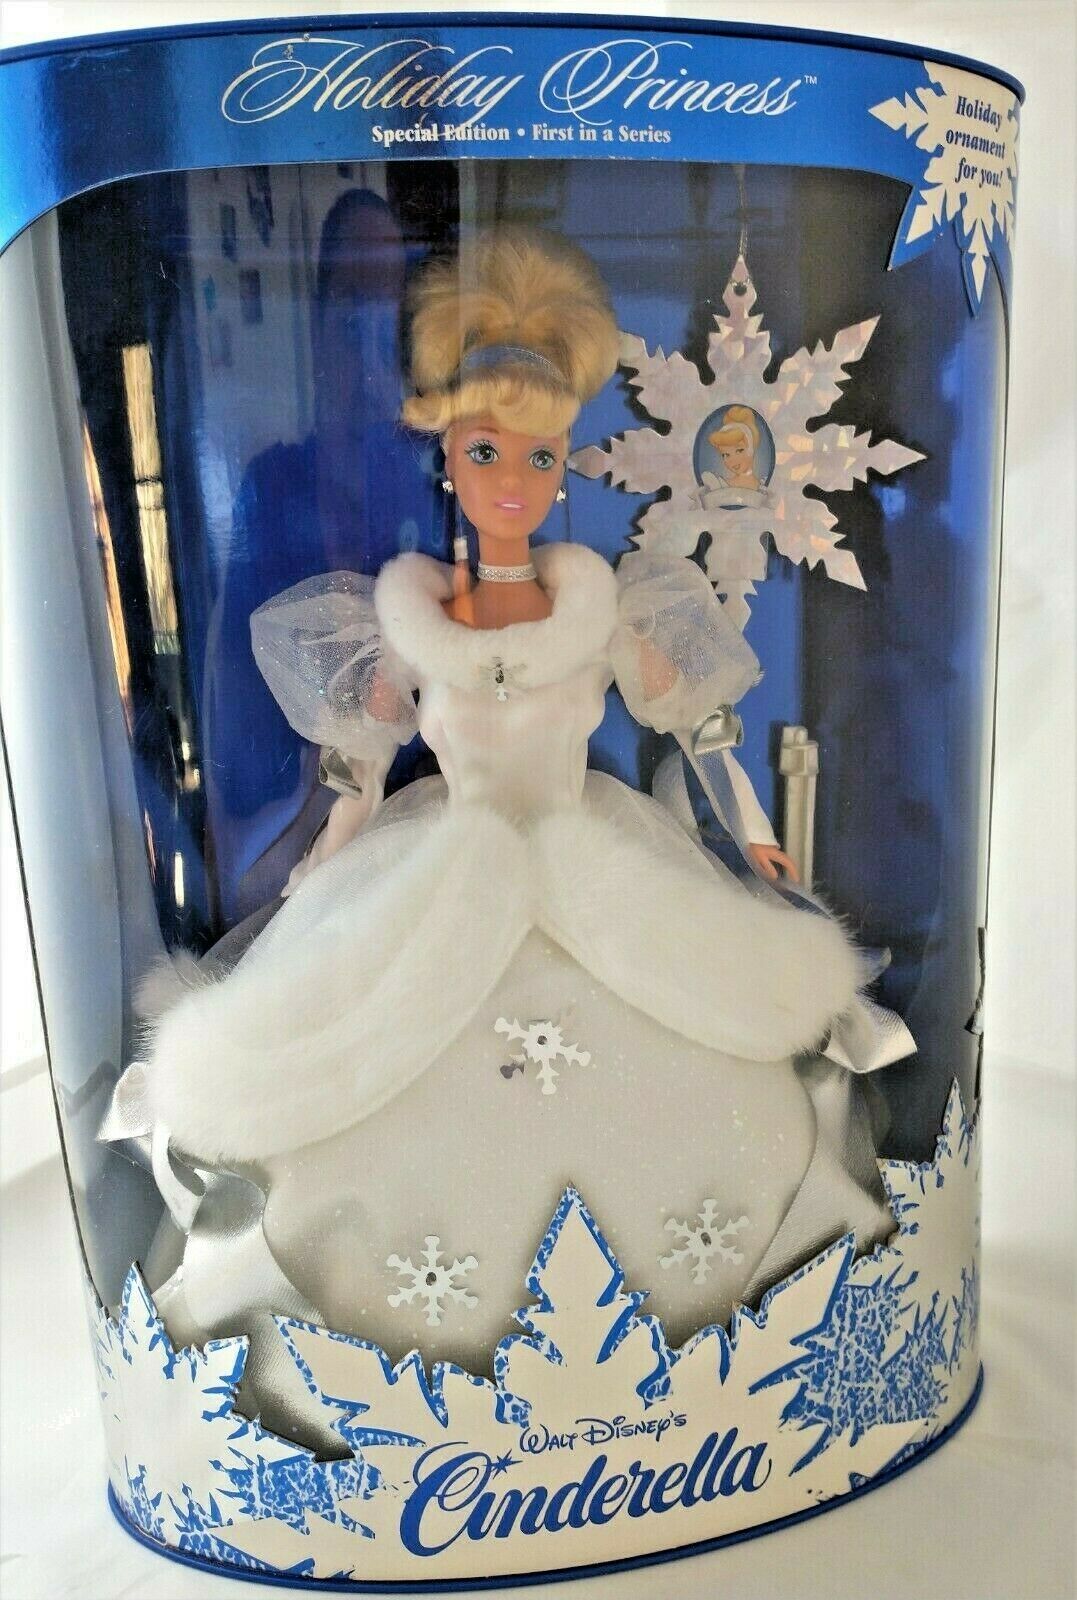 Barbie Holiday Princess Special Edition First In Series Walt Disney's Cinderella